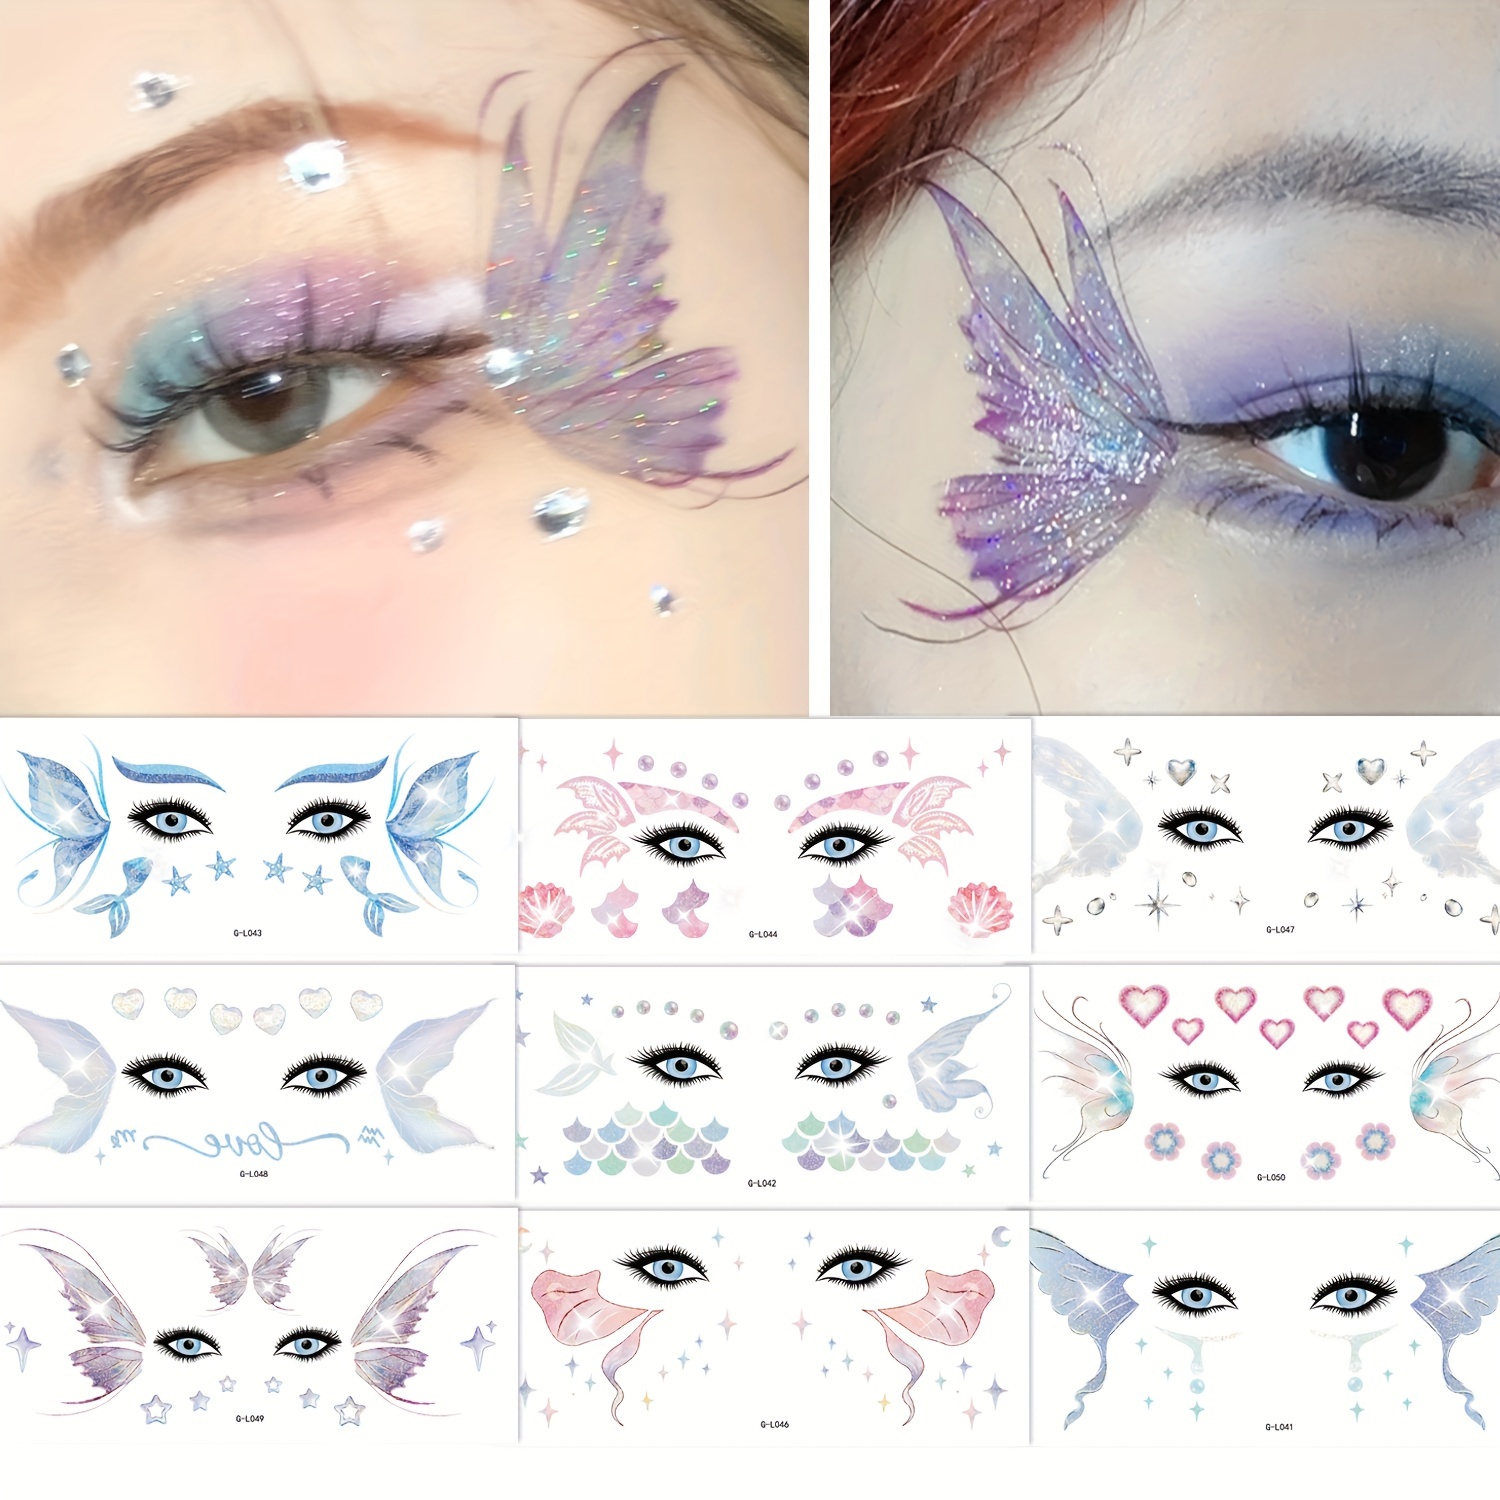 

10-pack Temporary Shimmer Butterfly Eye Tattoos, Girls Fantasy Butterfly & Mermaid Face Tattoos With Scales, Fairy Makeup For Princess Parties, Halloween Supplies - Shape: Oblong